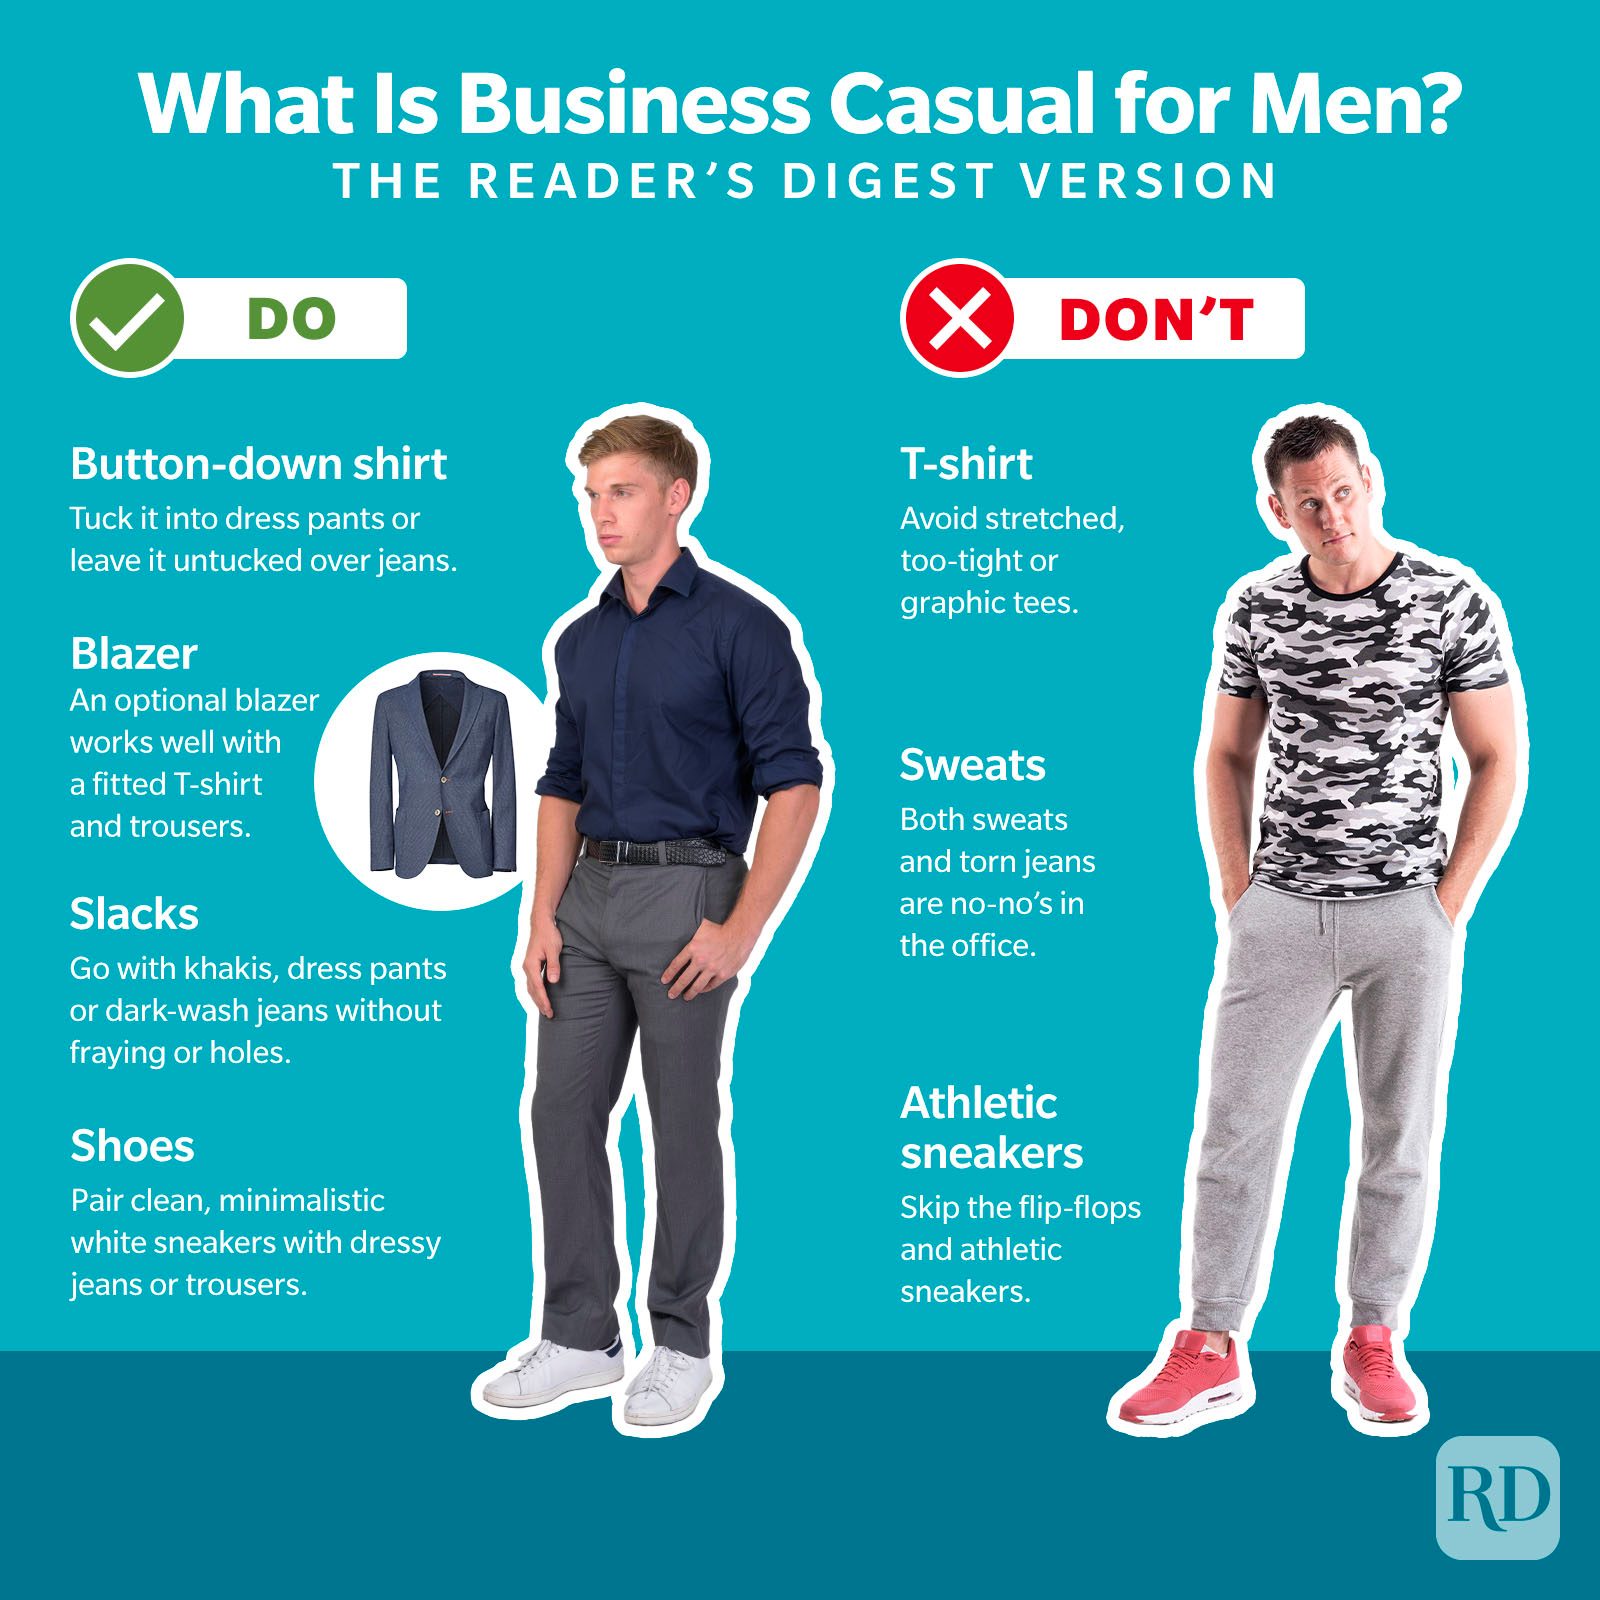 What Is Business Casual? Fashion Experts Explain How to Dress for Work